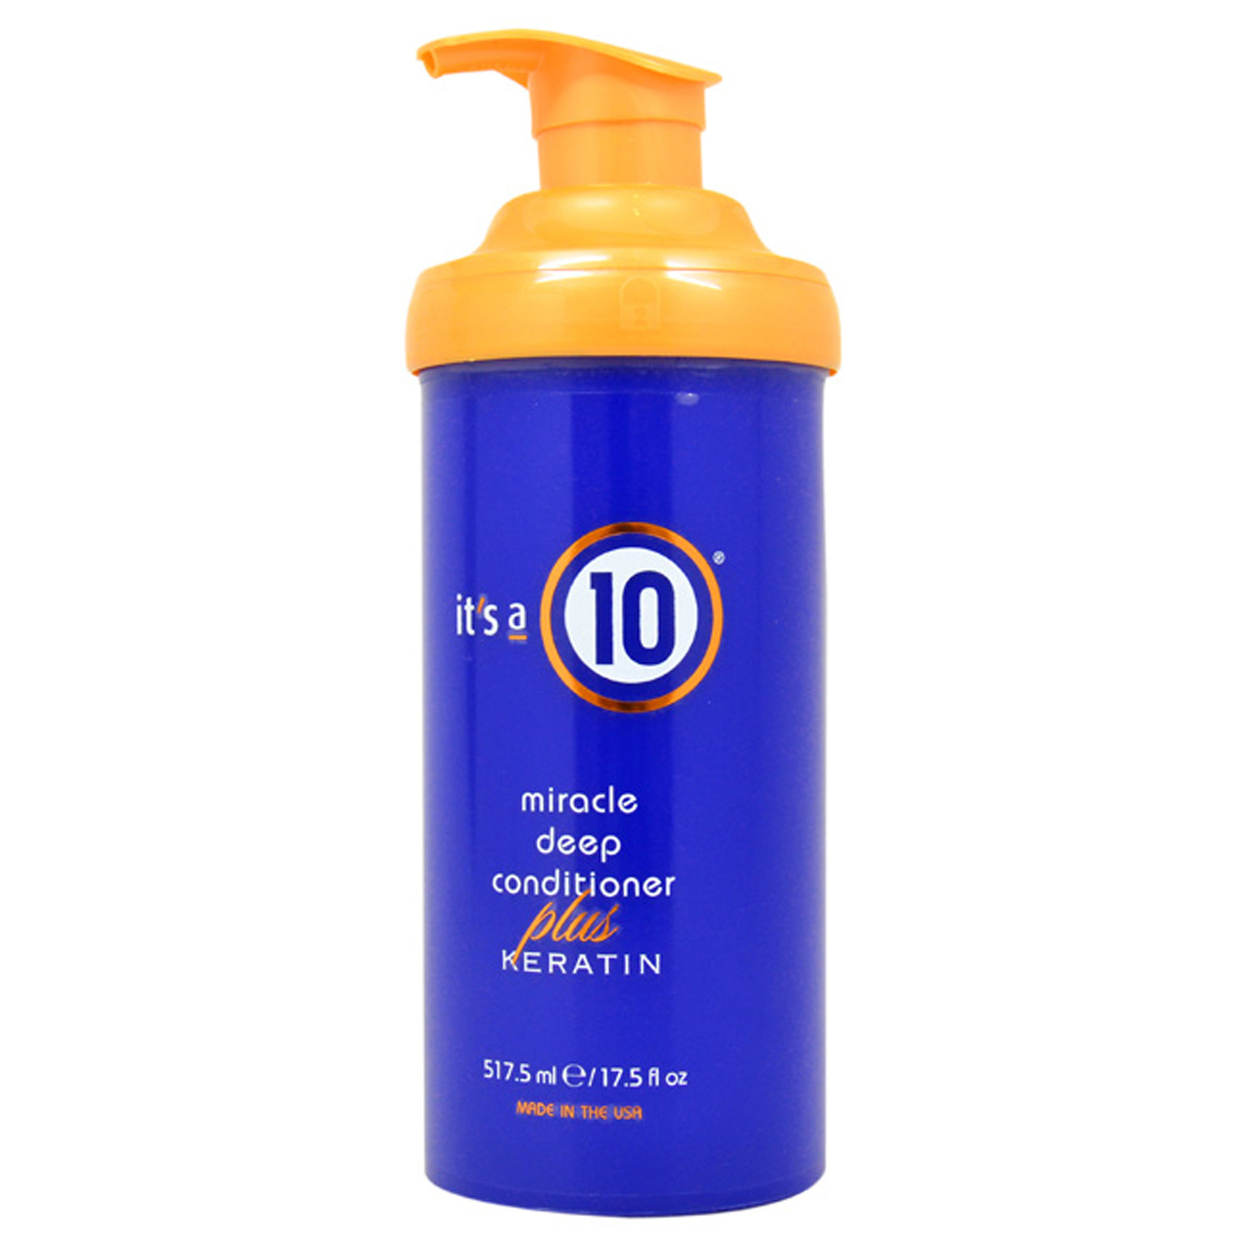 It's A 10 Unisex HAIRCARE Miracle Deep Conditioner Plus Keratin 17.5 Oz